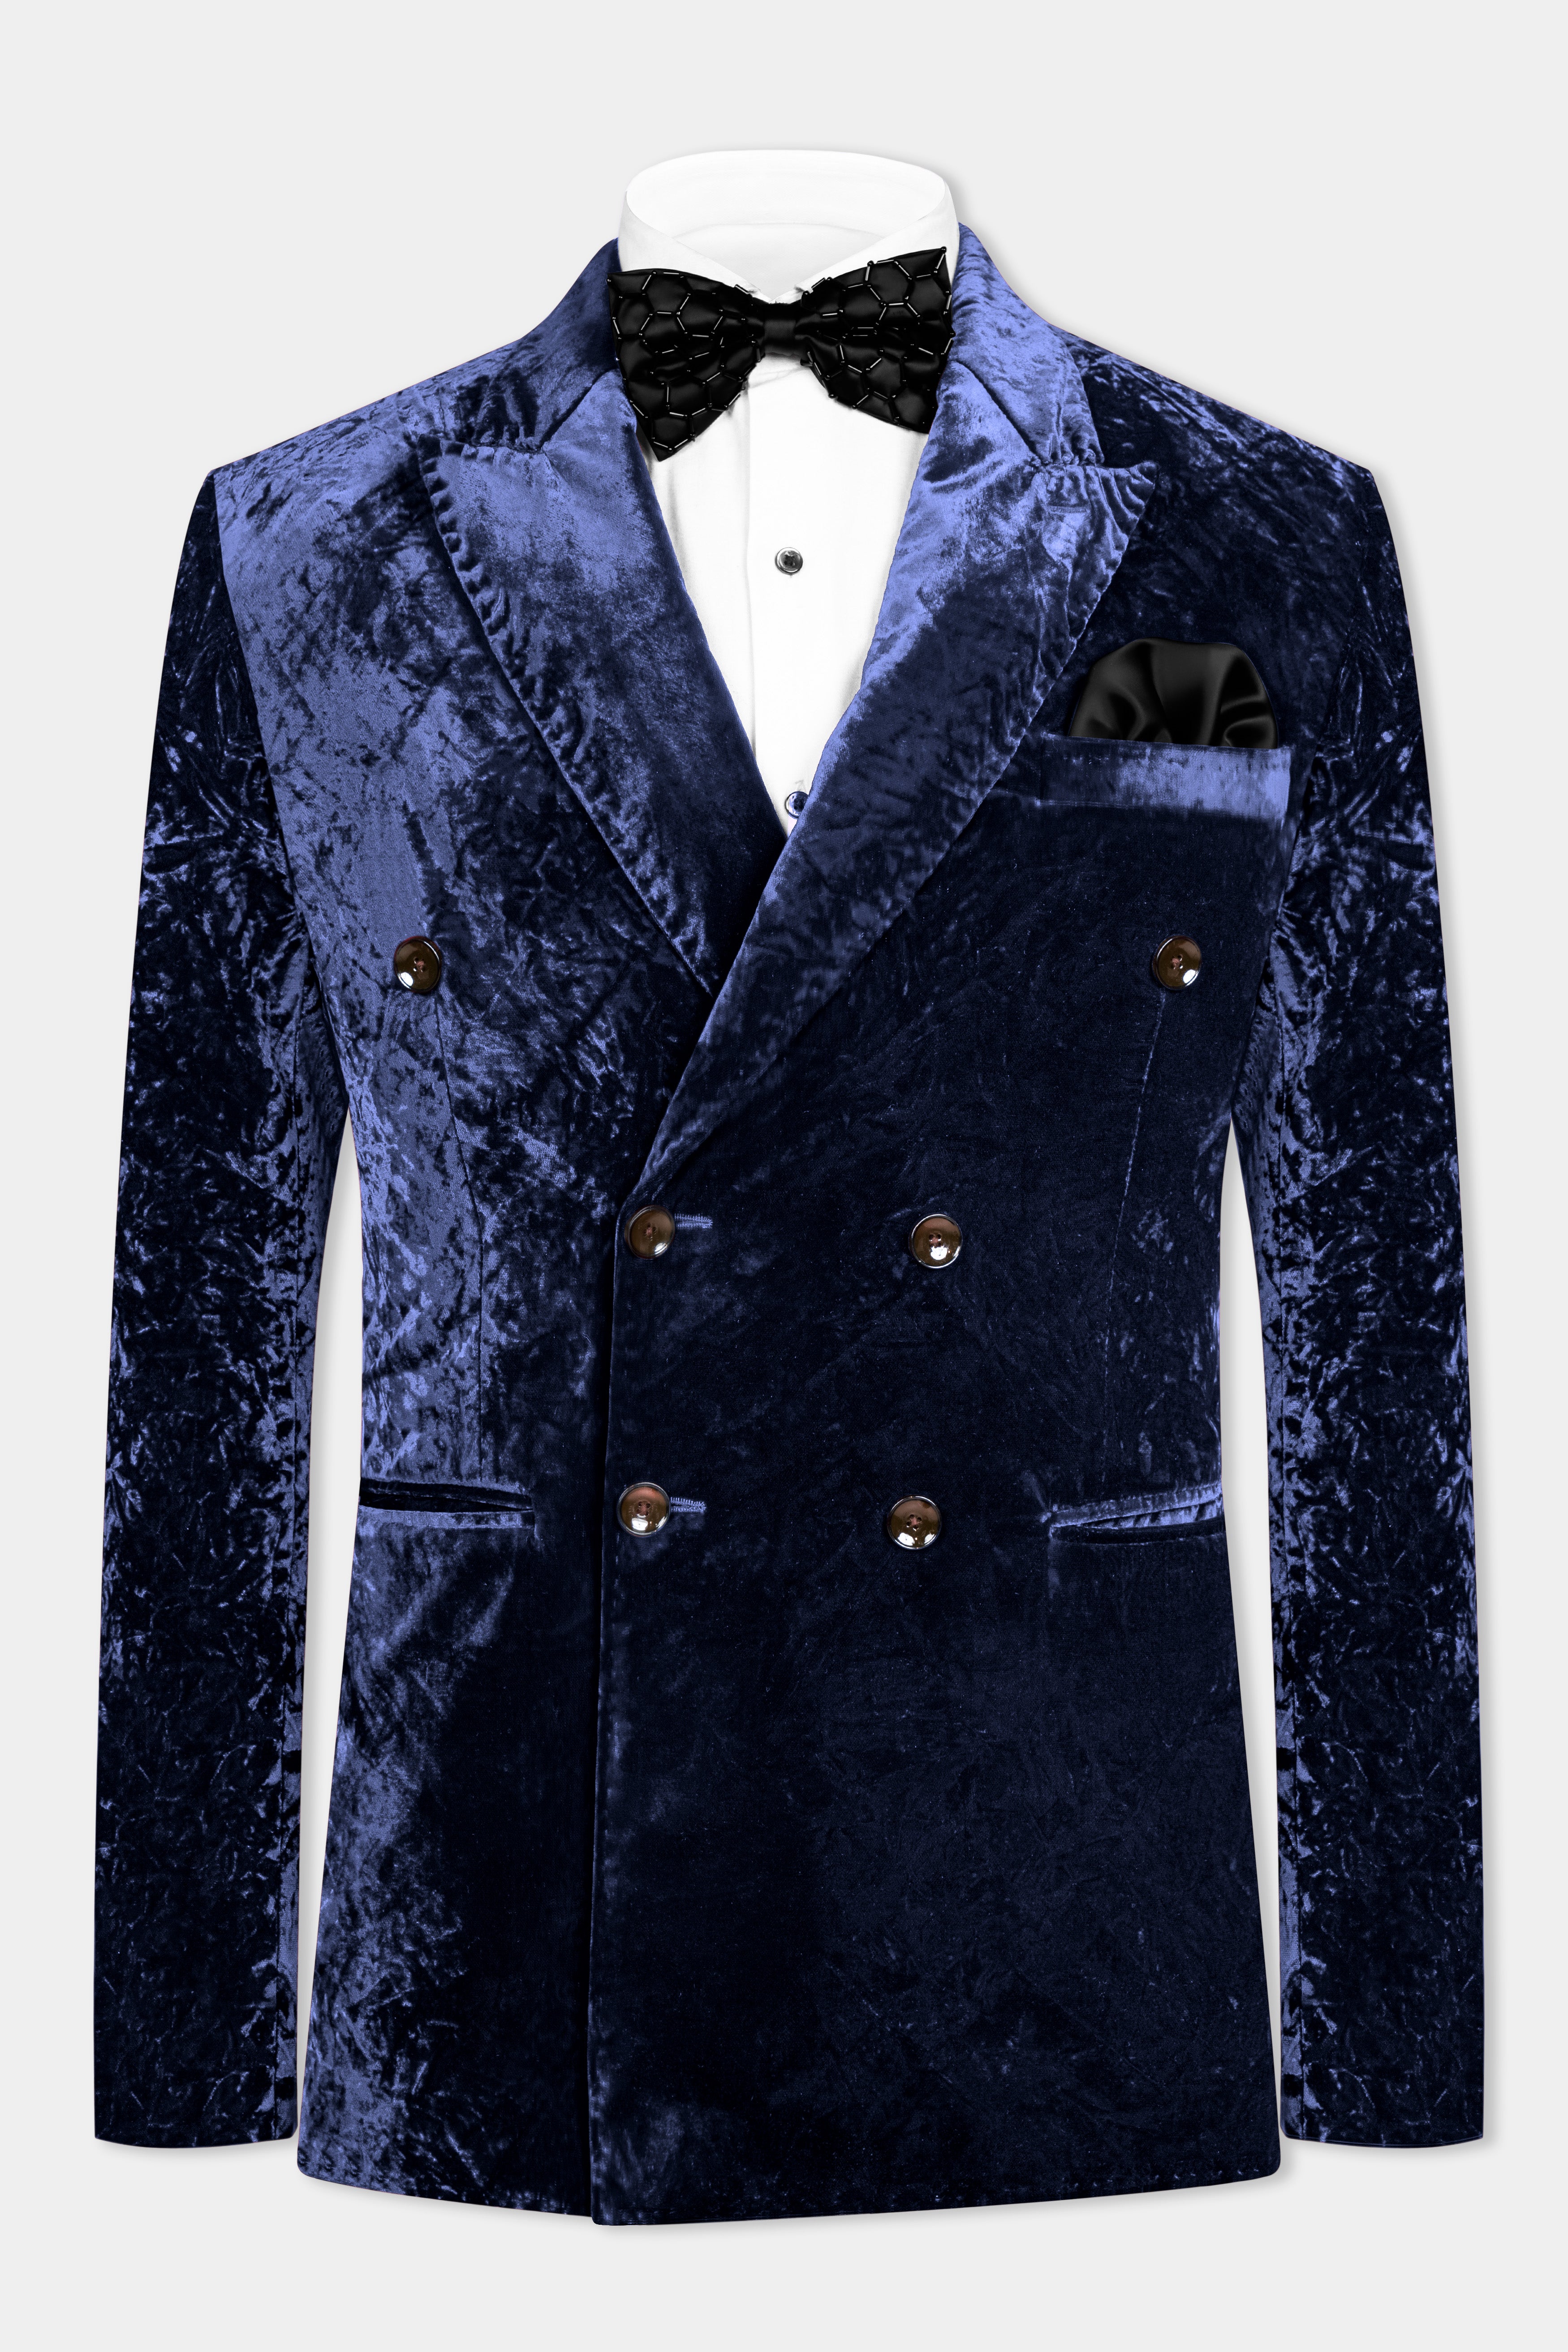 Shop Blazers For Men in India, Casual And Formal Blazers For Your